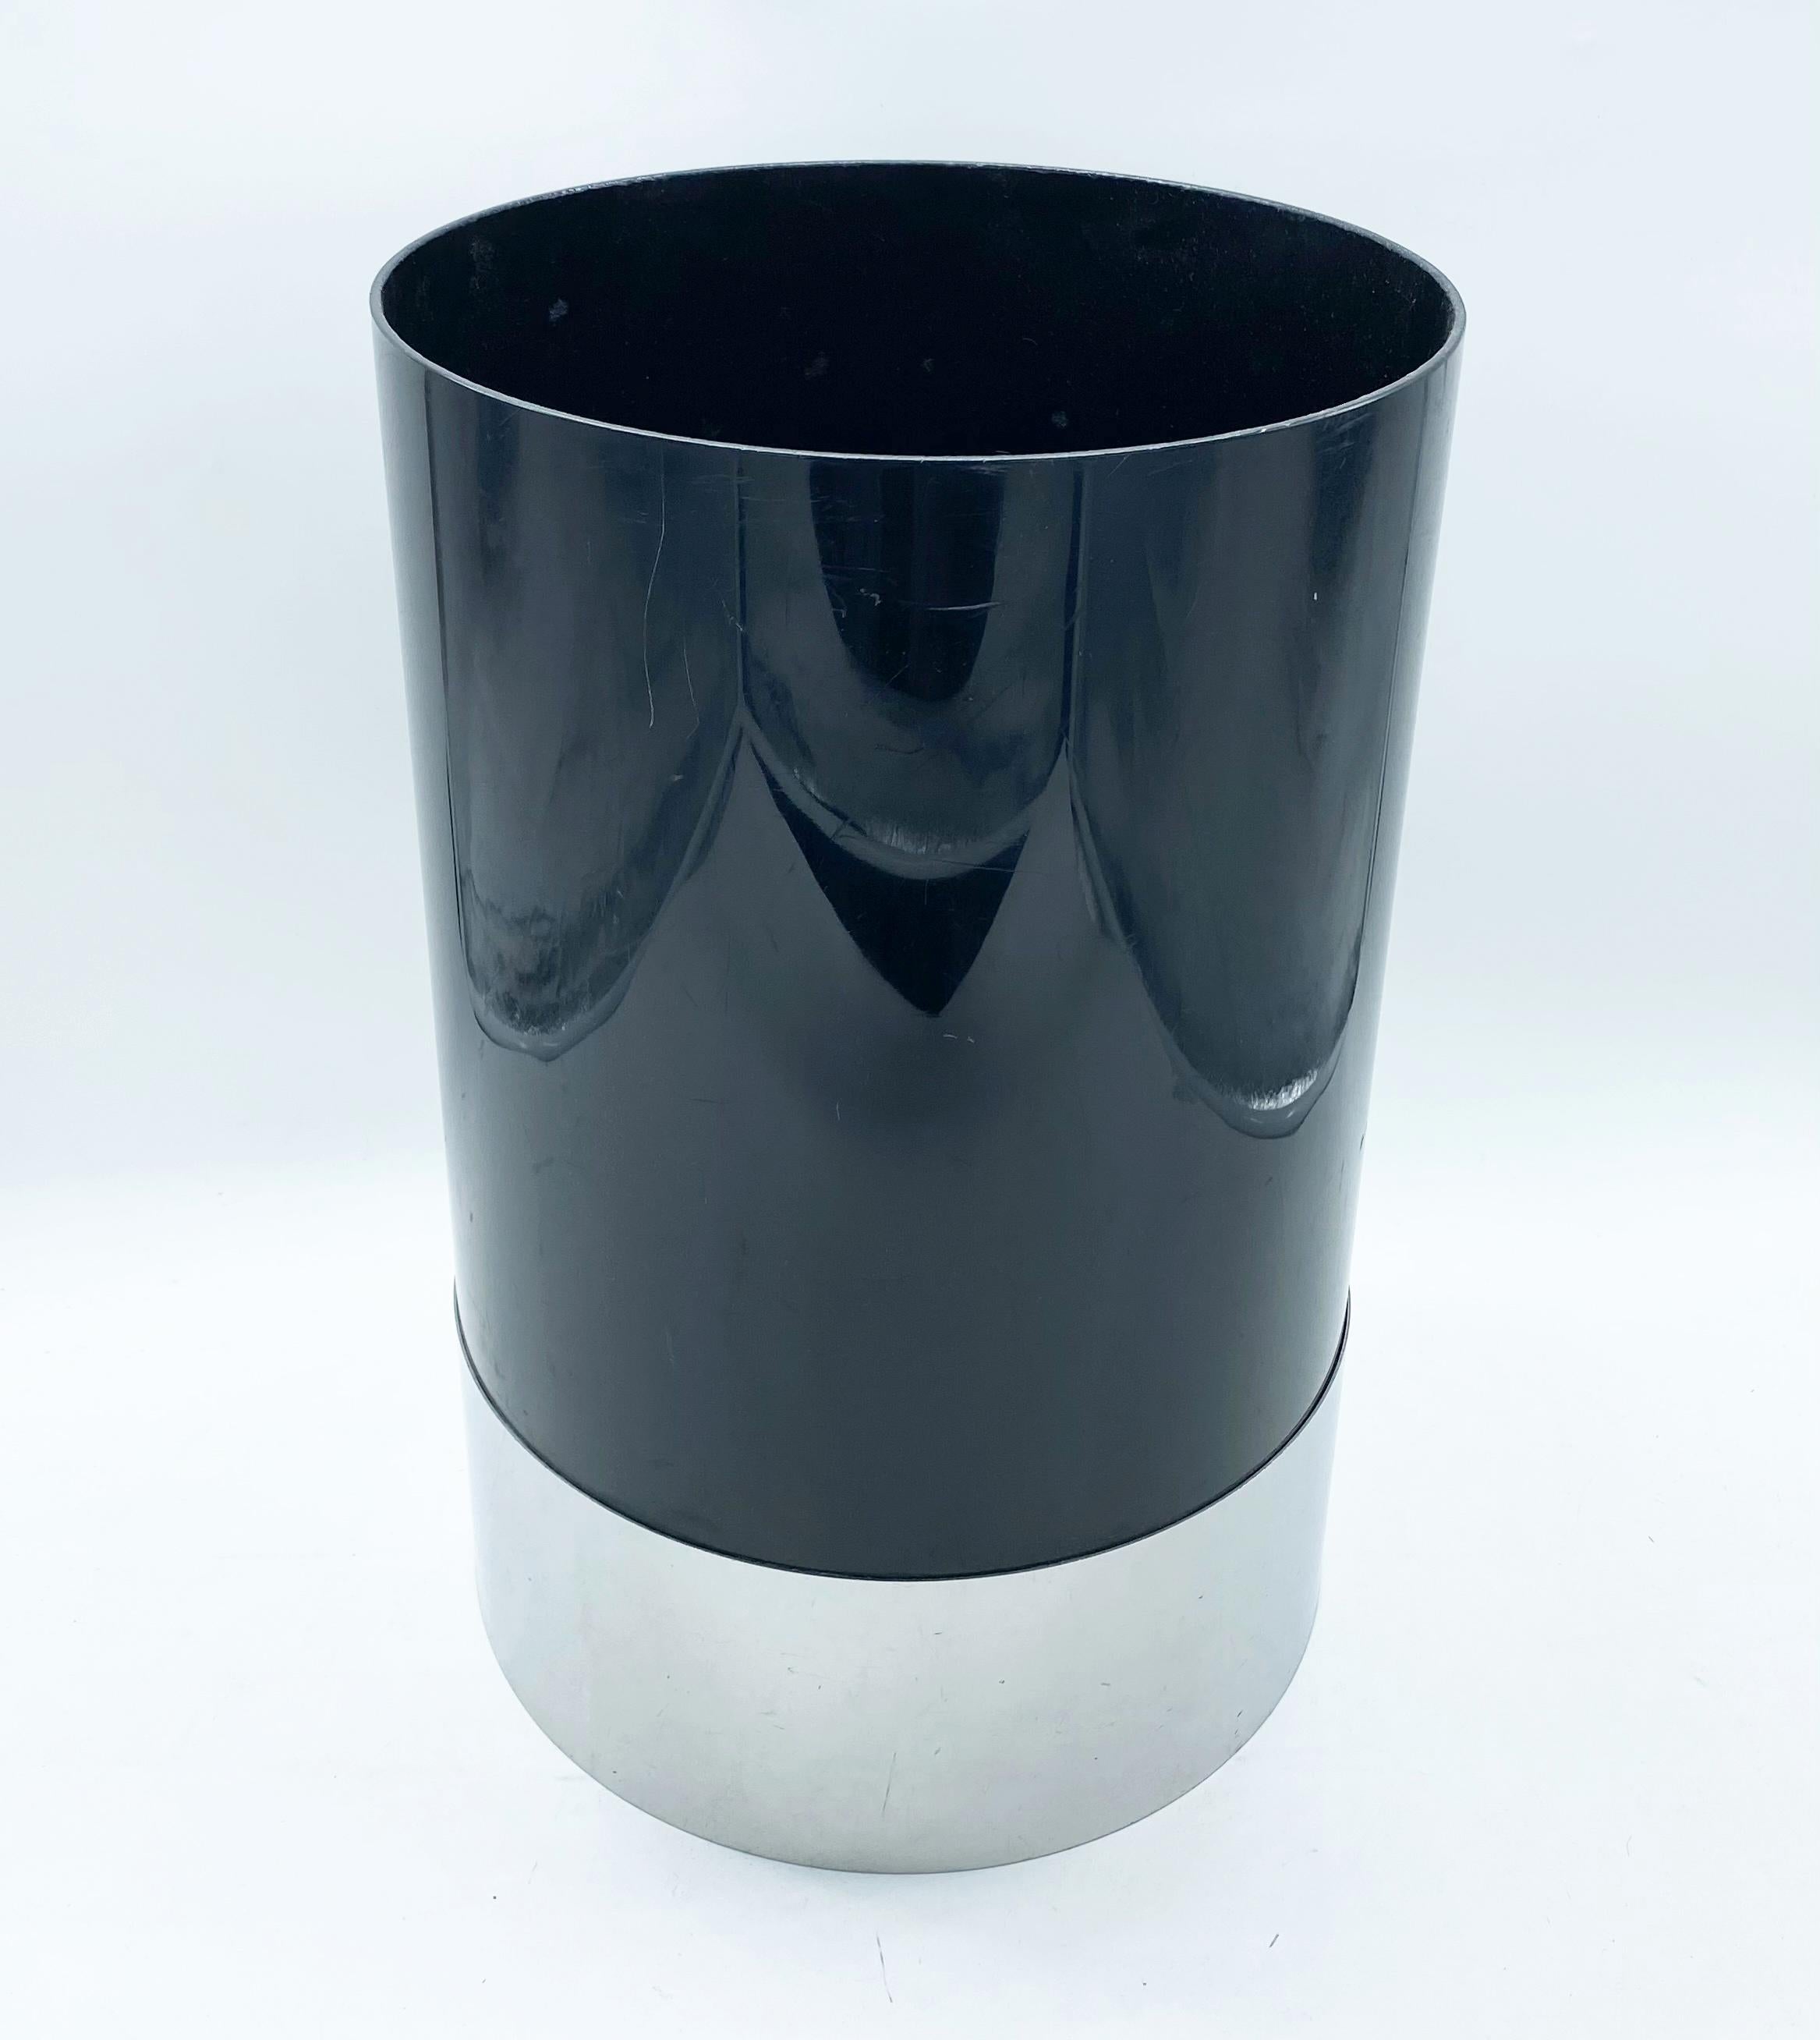 Simple and stylized design for one of the historical pieces of the Kartell collection: the Waste Bin. This 